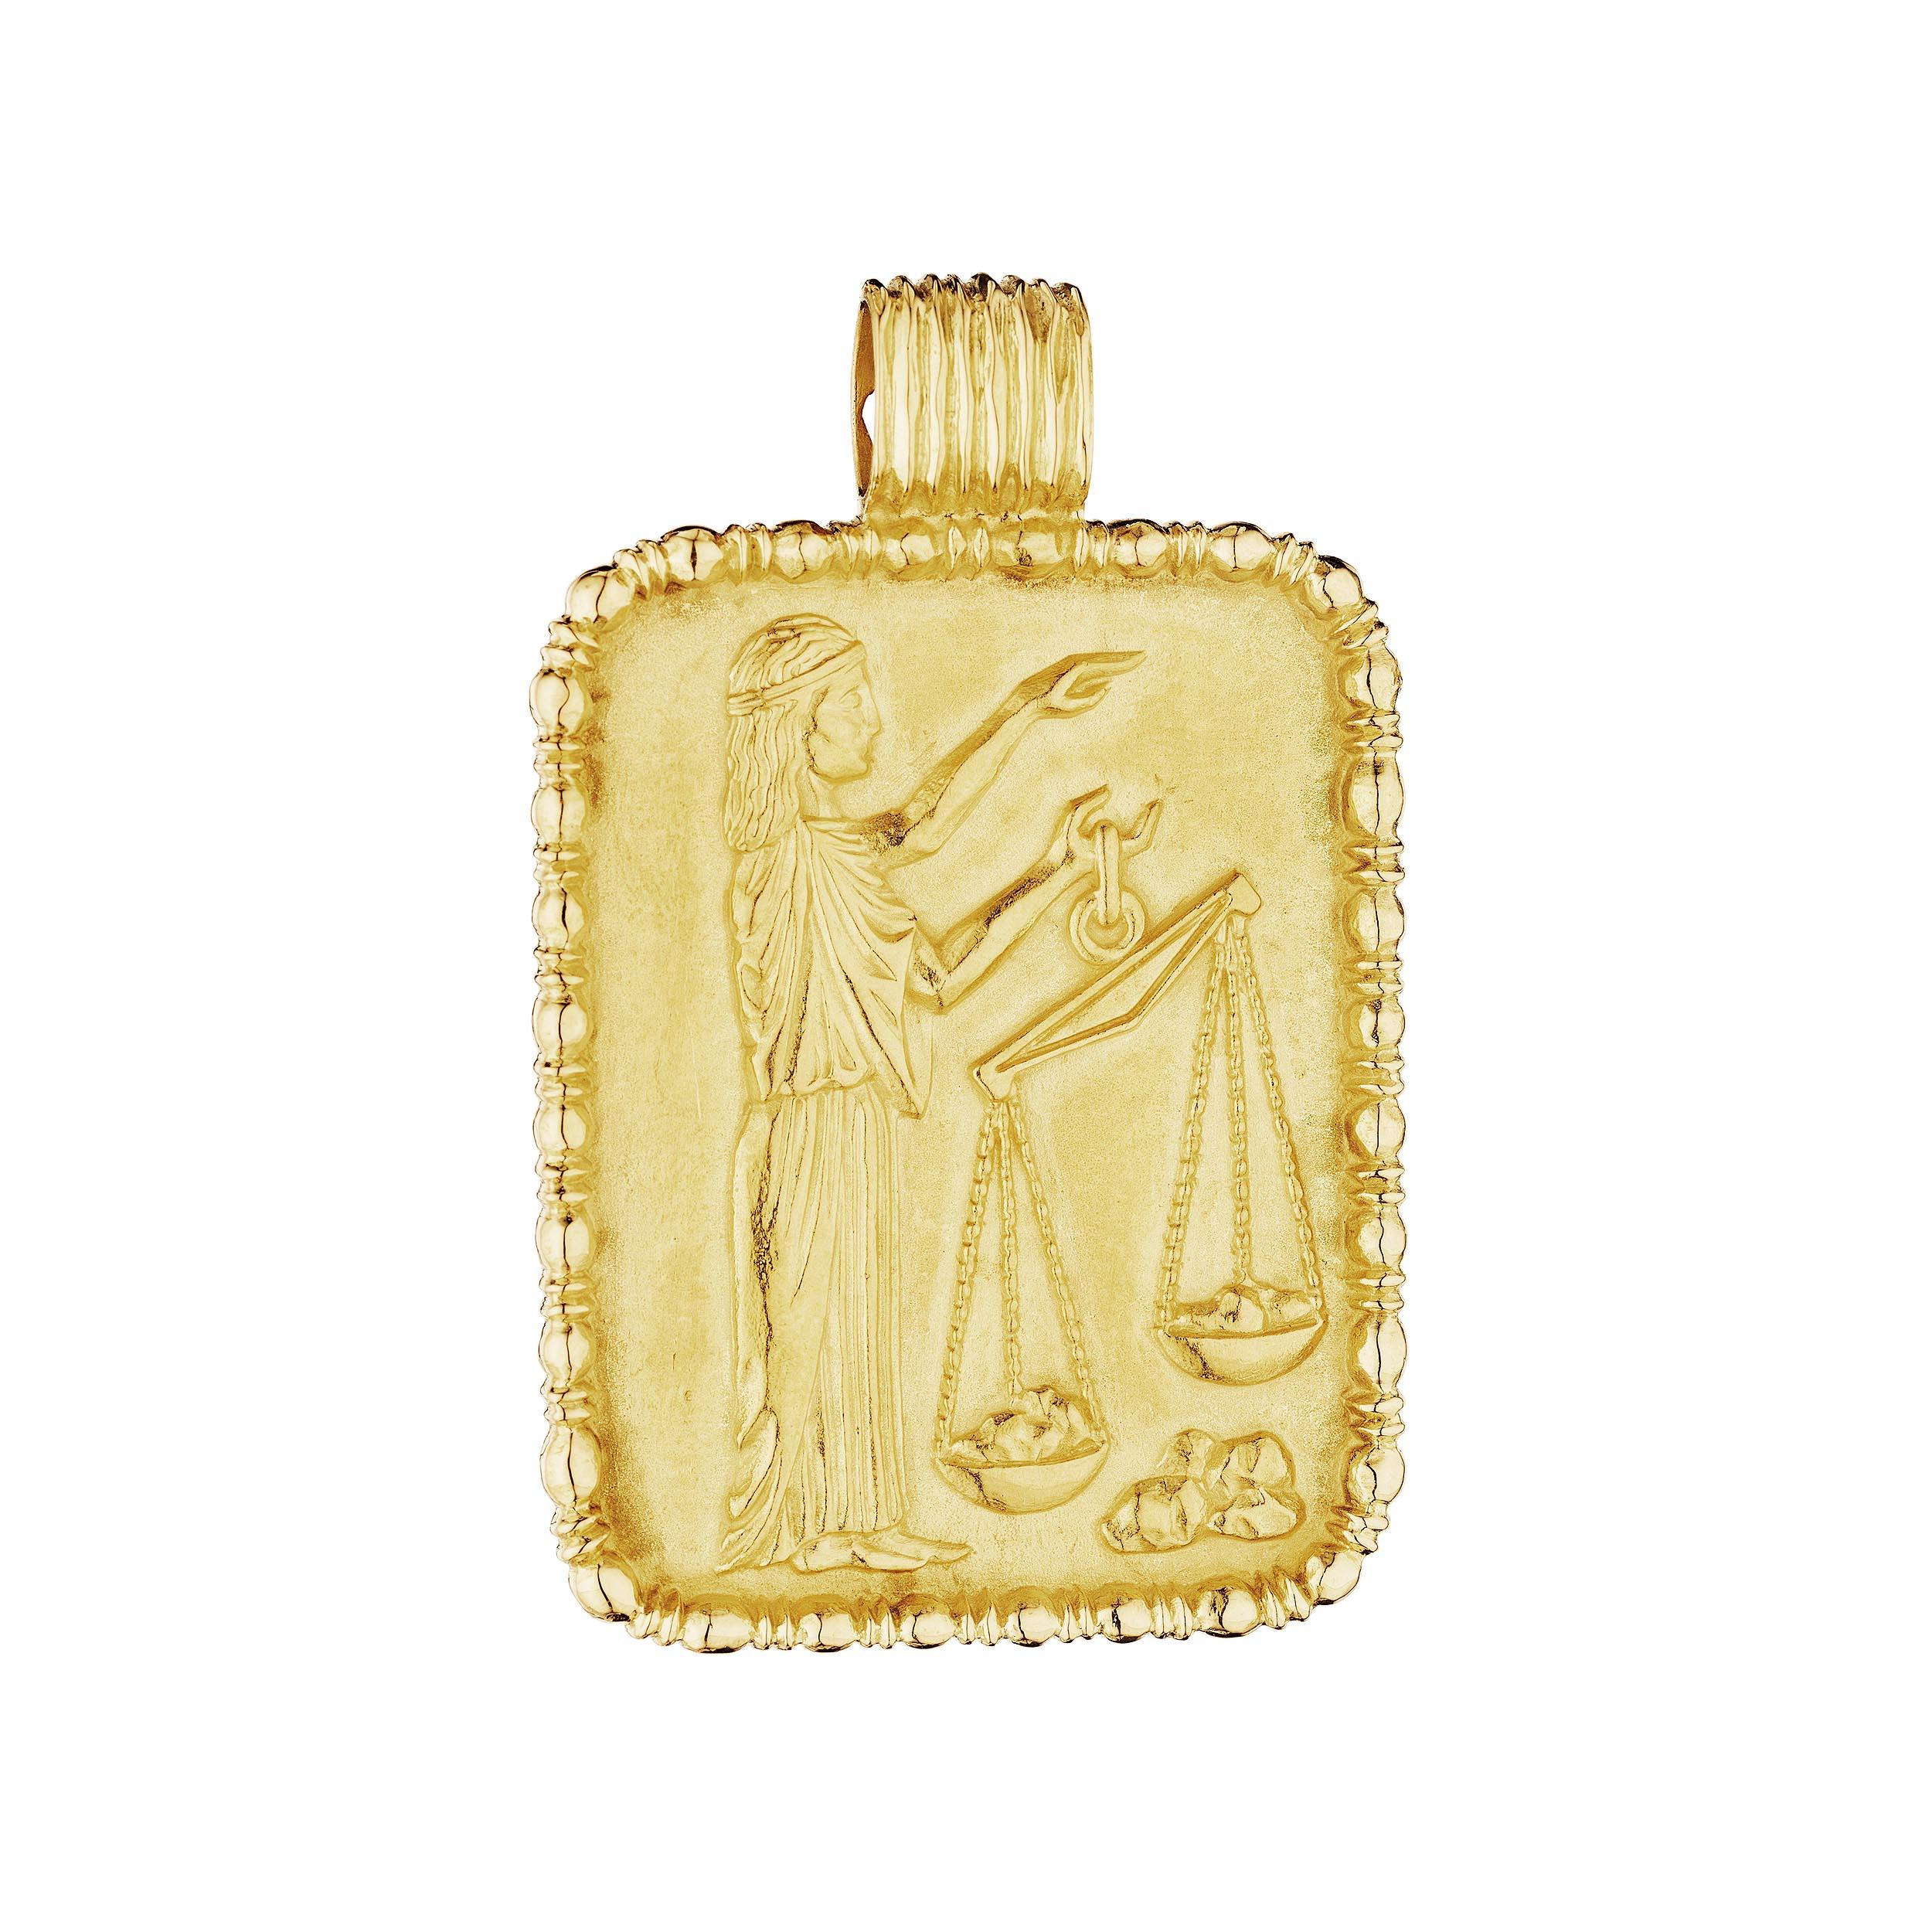 The zodiac sign libra symbolizes balance and harmony, and this Fred Paris modernist libra rectangular pendant will keep you both steady and tranquil.  With a wonderful two-dimensional portrait of the libra goddess and her balancing scale on the